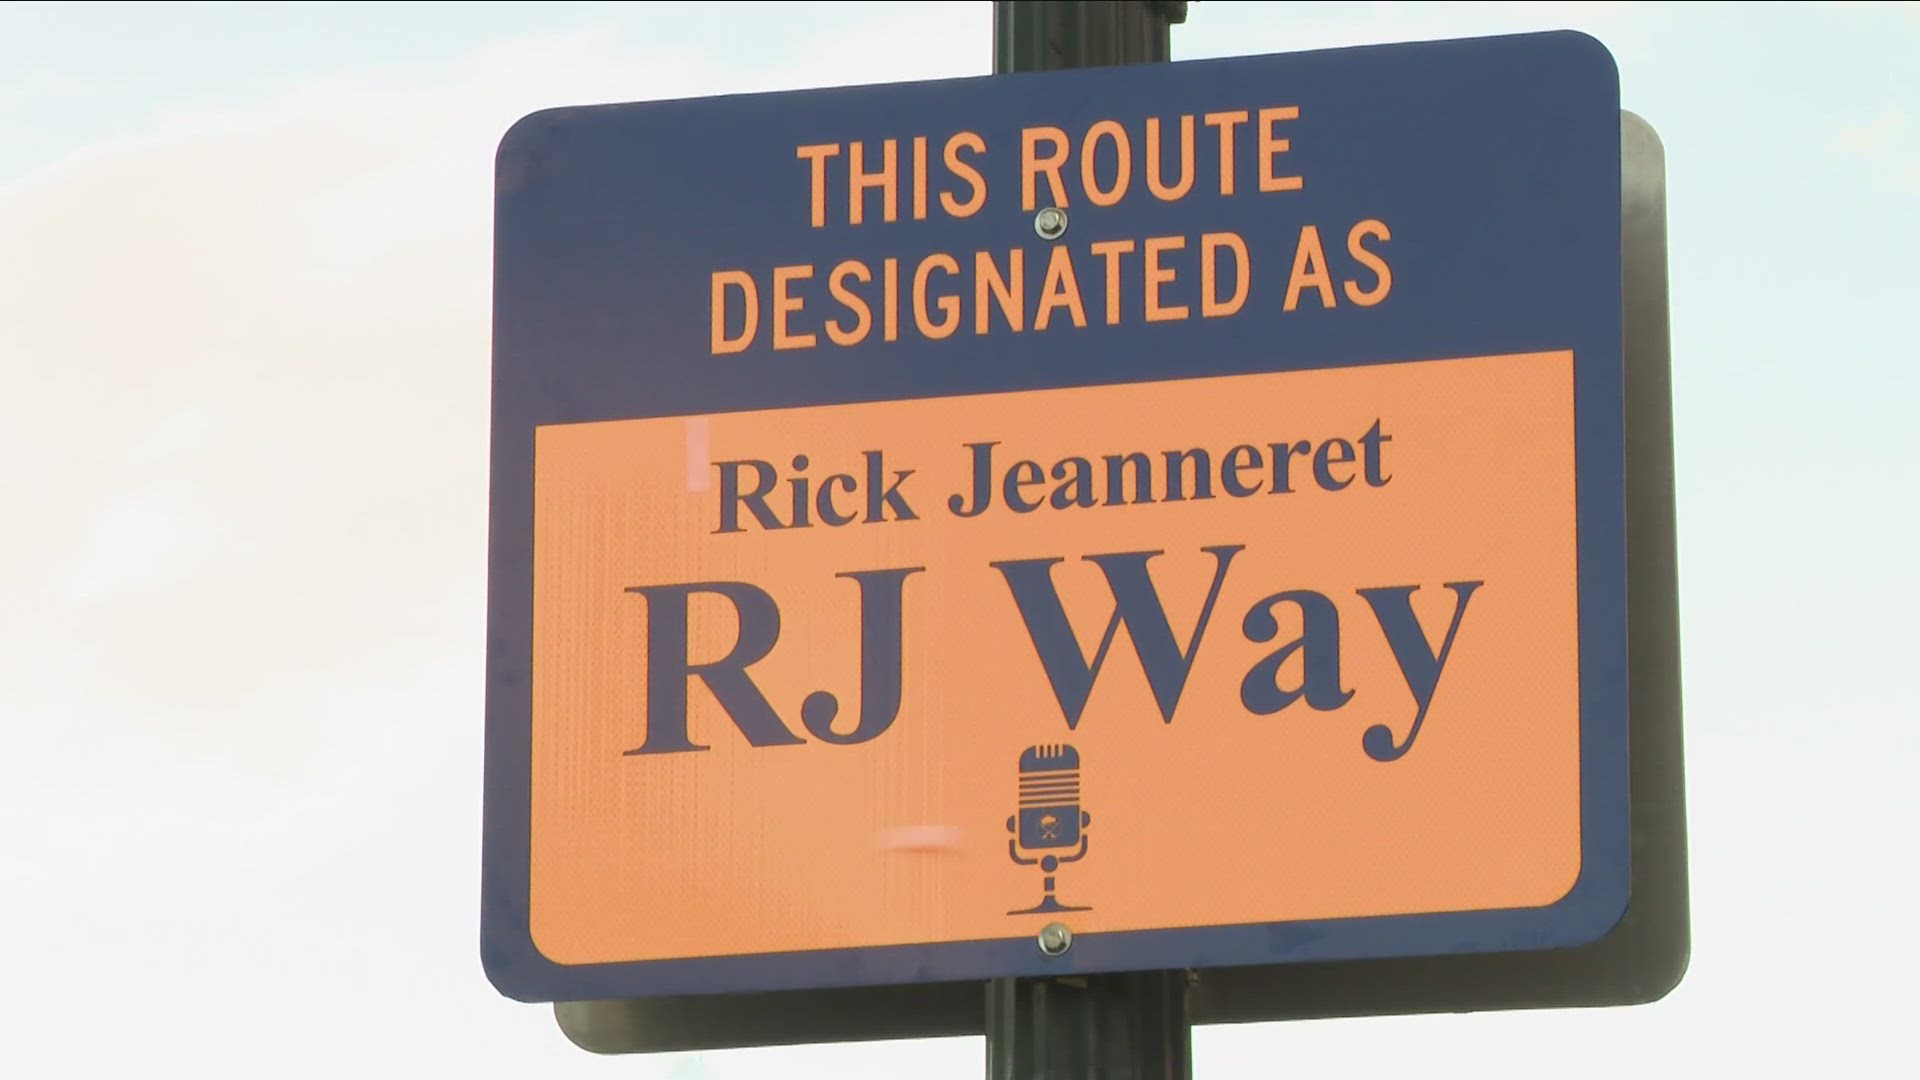 The corner of Perry Street and Illinois Street is now designated as ‘RJ Way.’